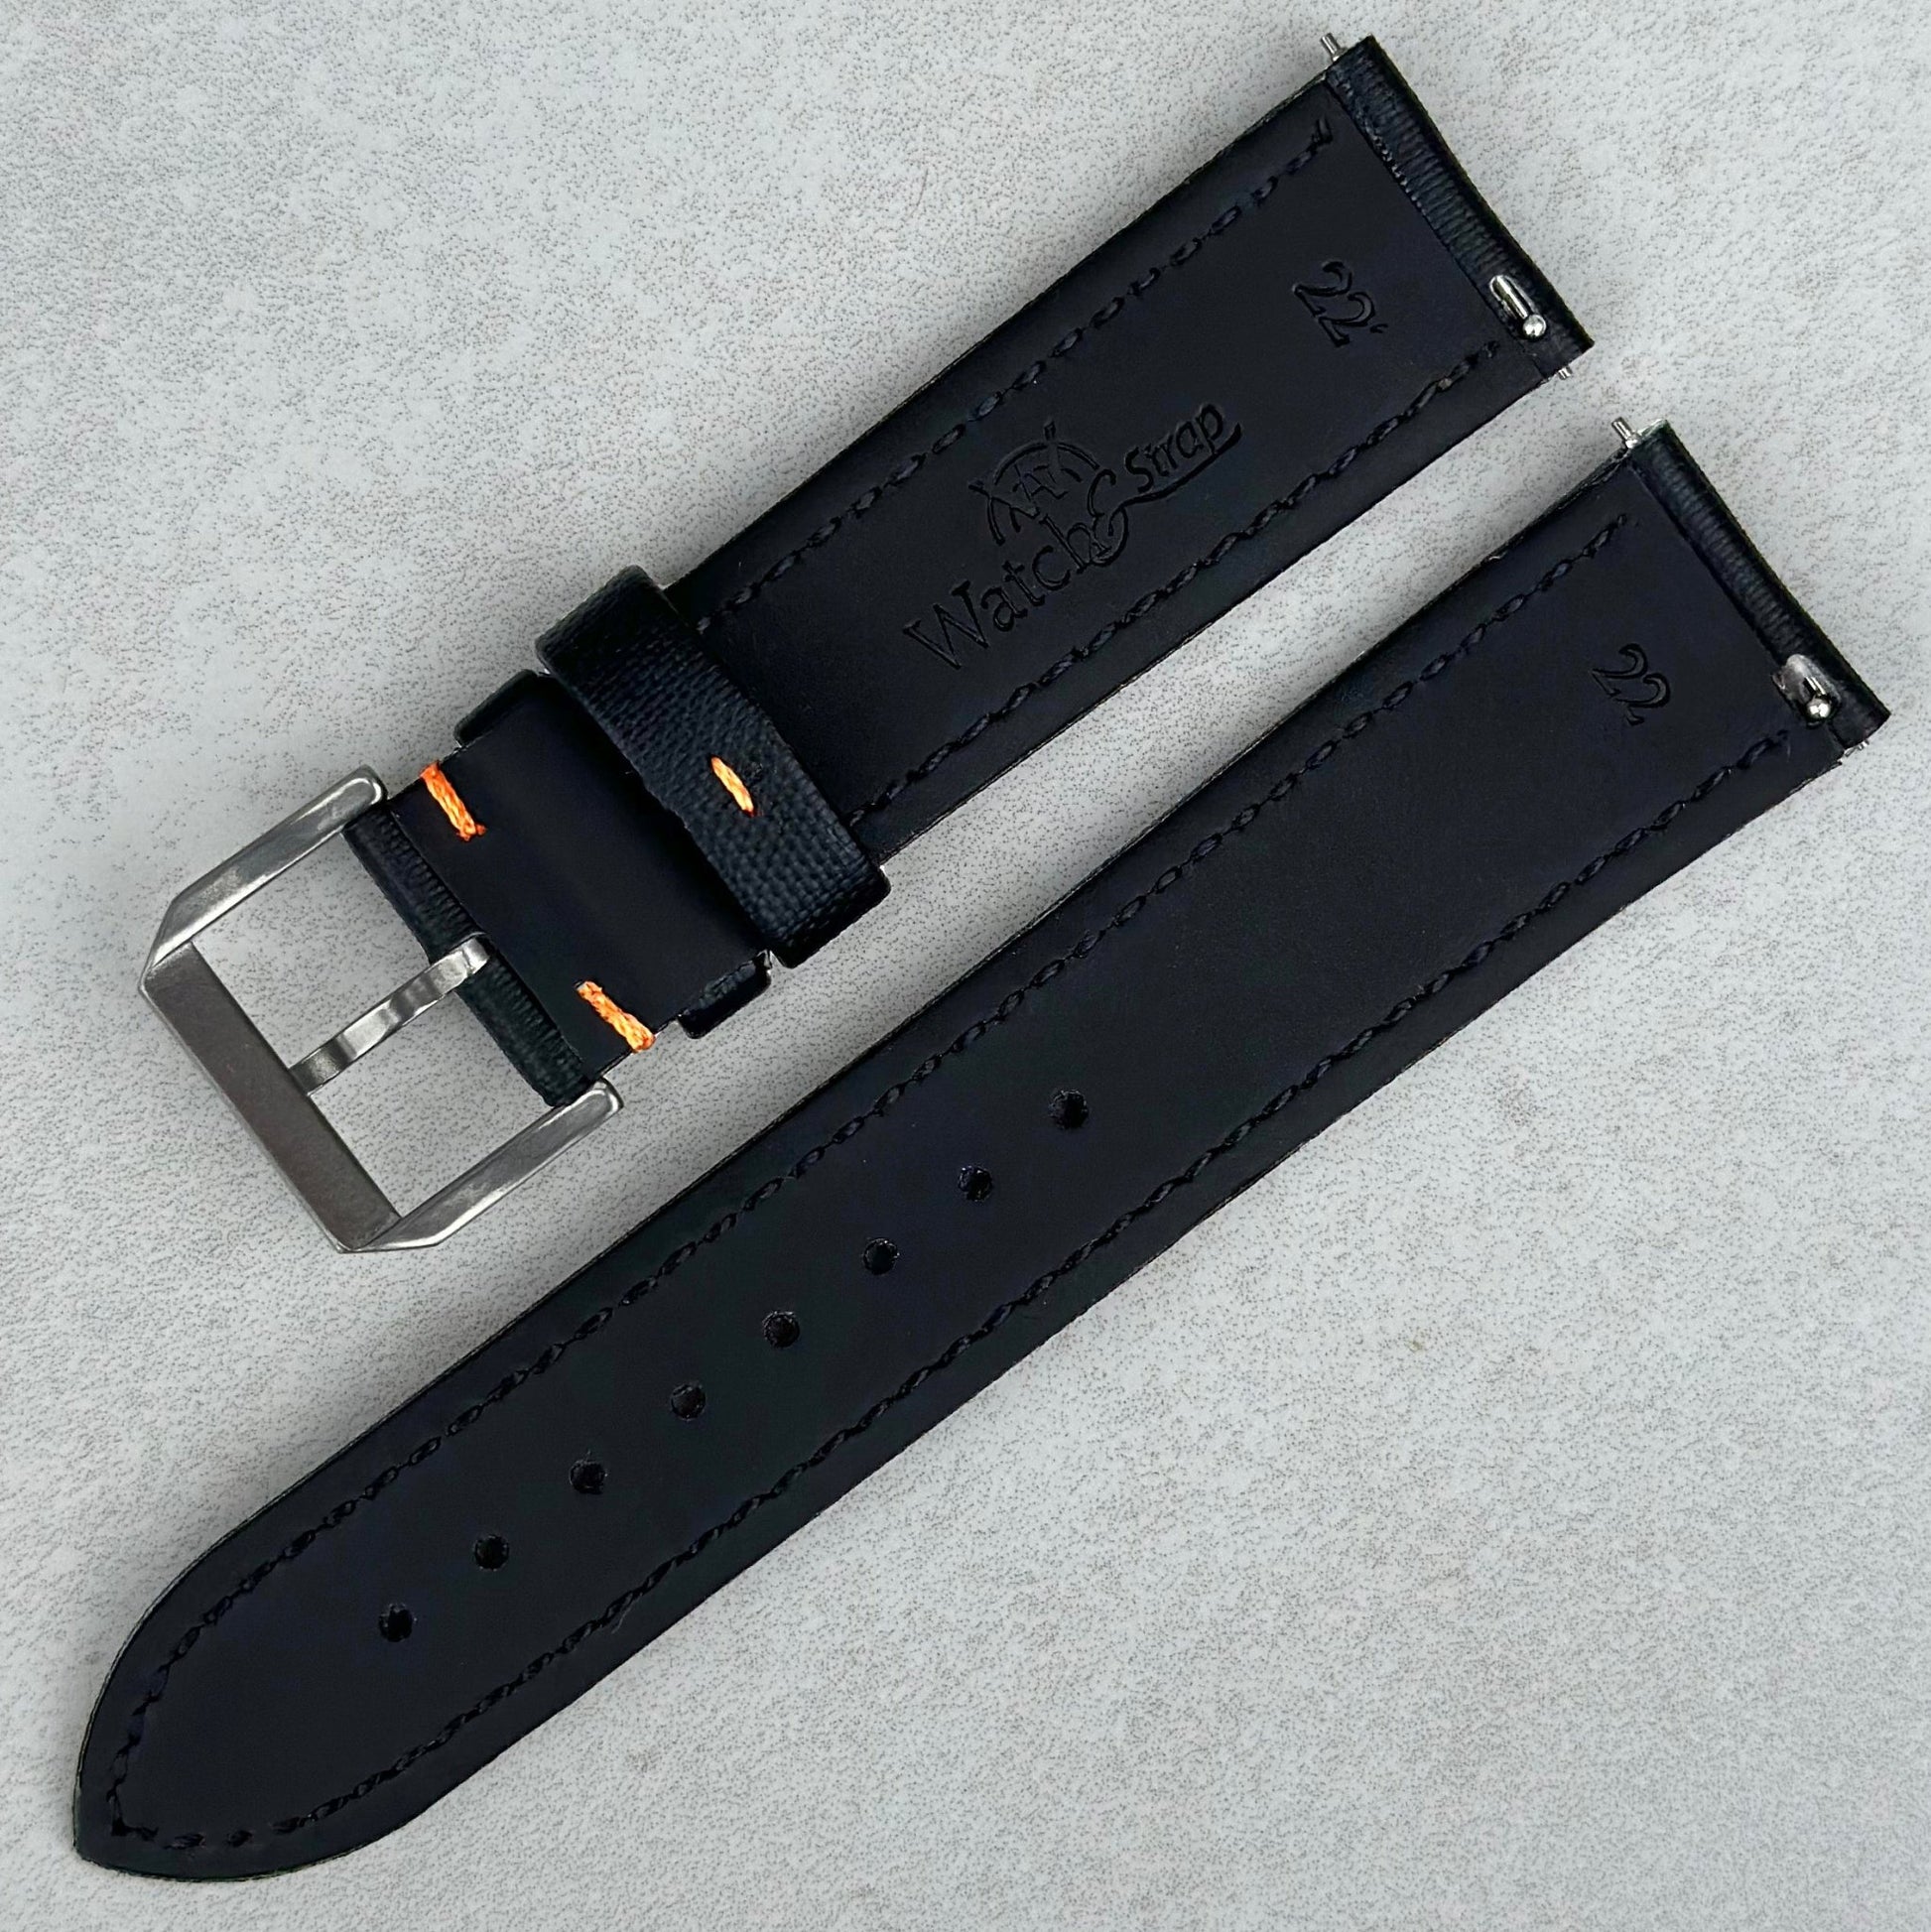 Rear of the Bermuda jet black sail cloth watch strap with contrast orange stitching. Quick release pins. Watch And Strap.